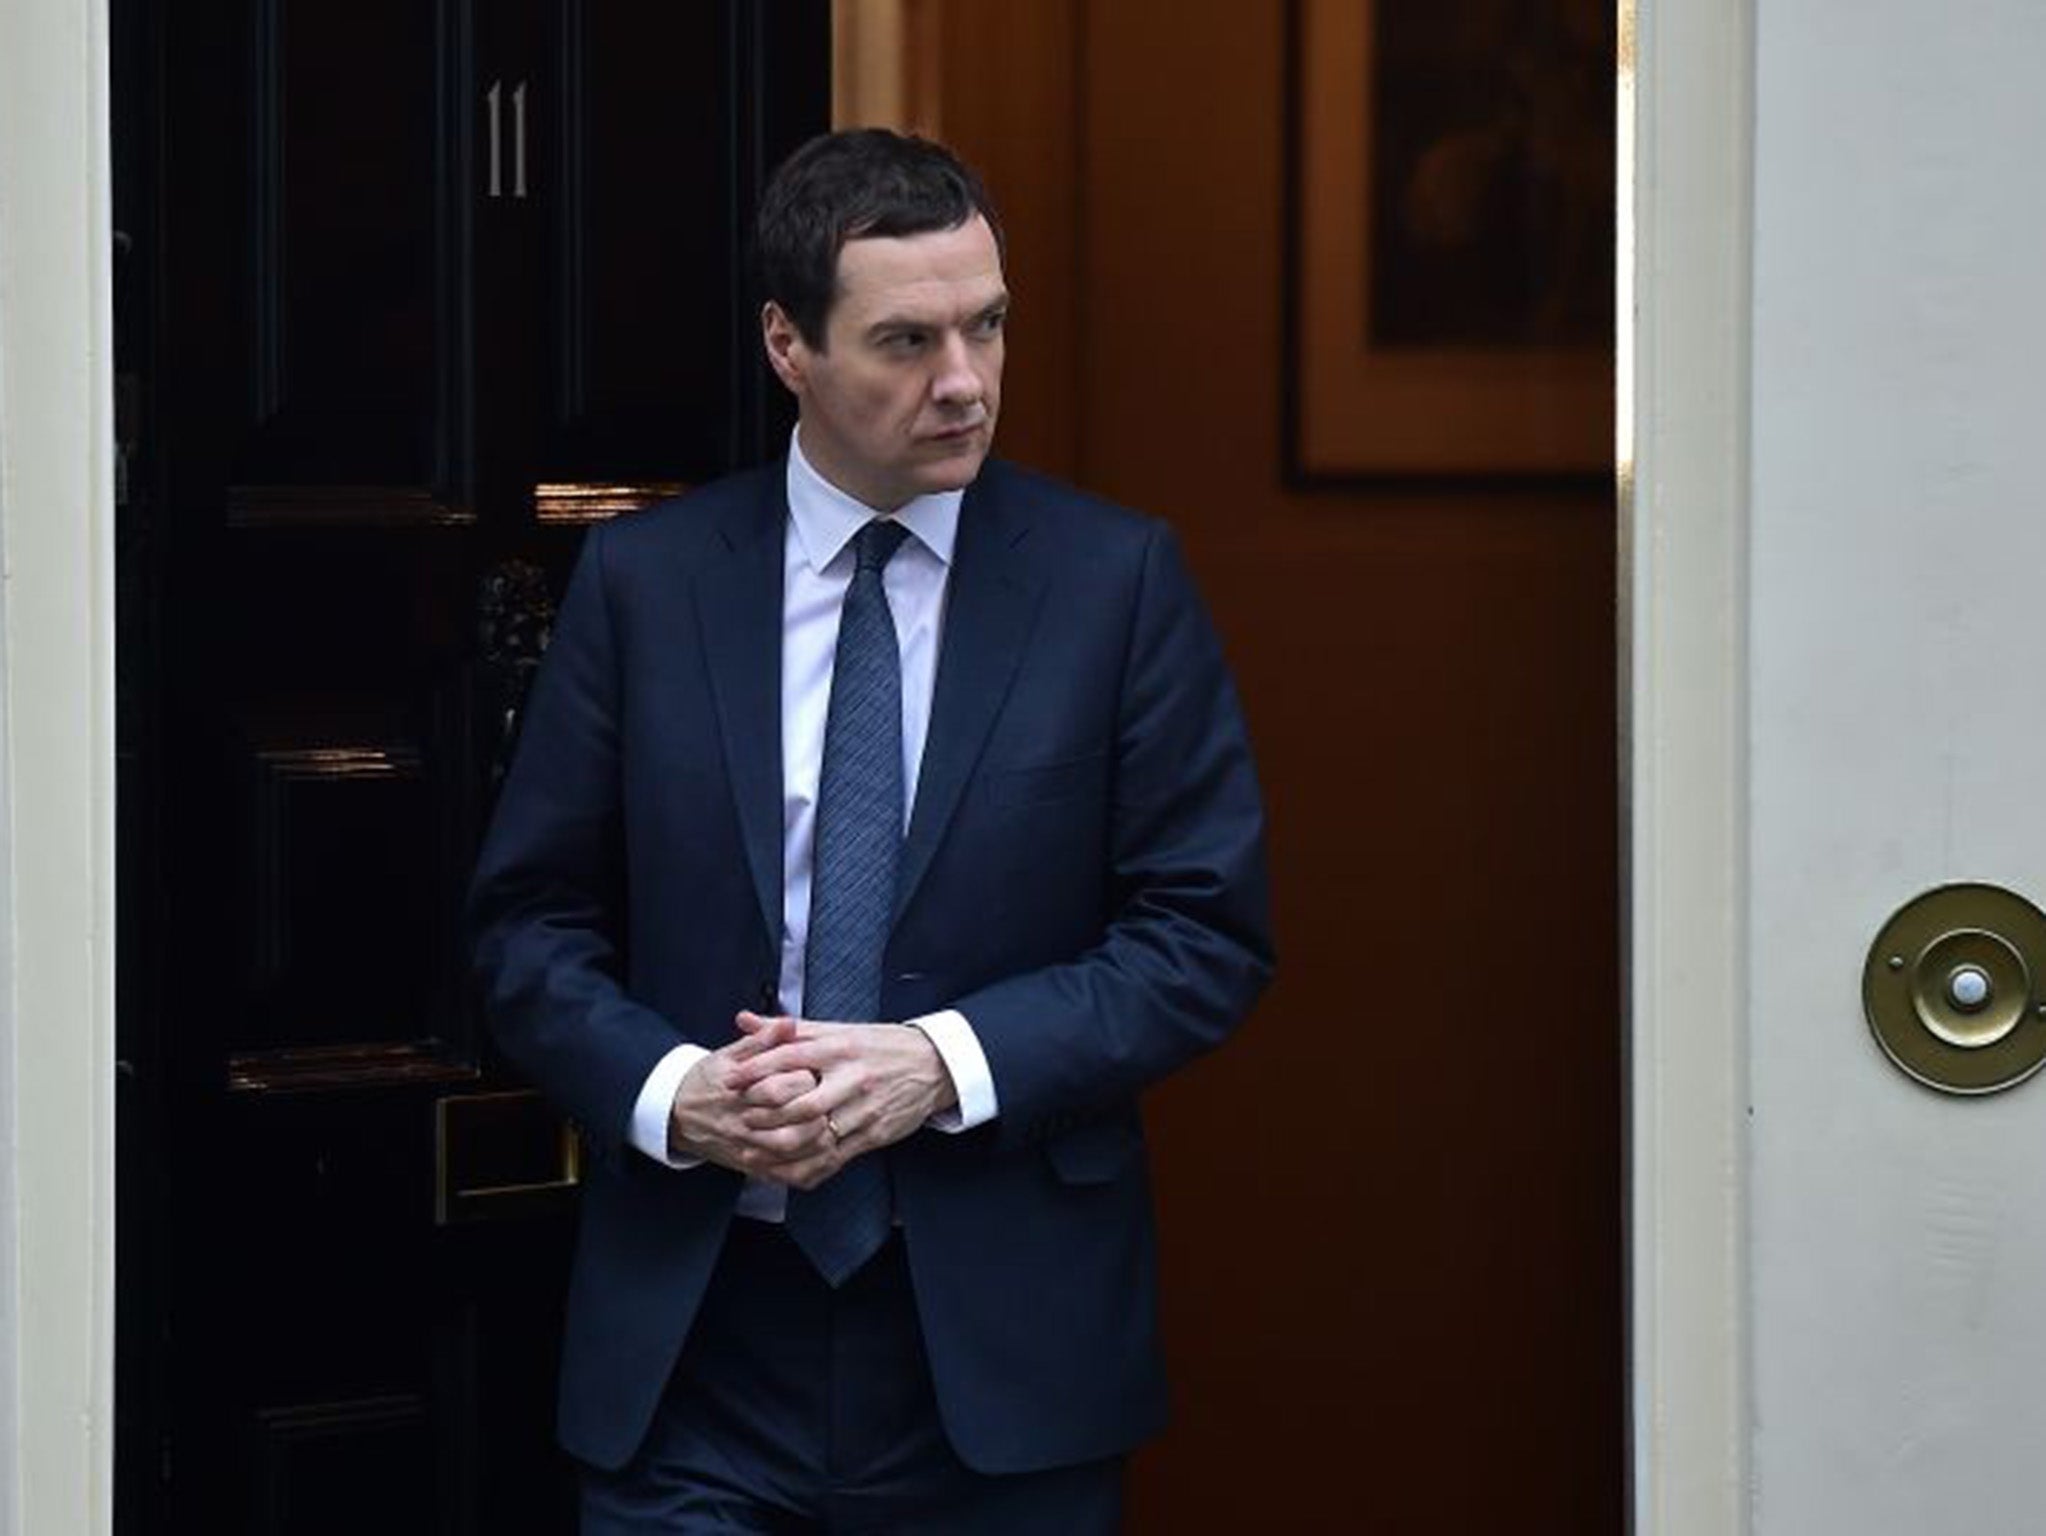 Osborne wants to "accelerate progress" towards the pledge of raising threshold to £50,000 at which people start paying 40p tax